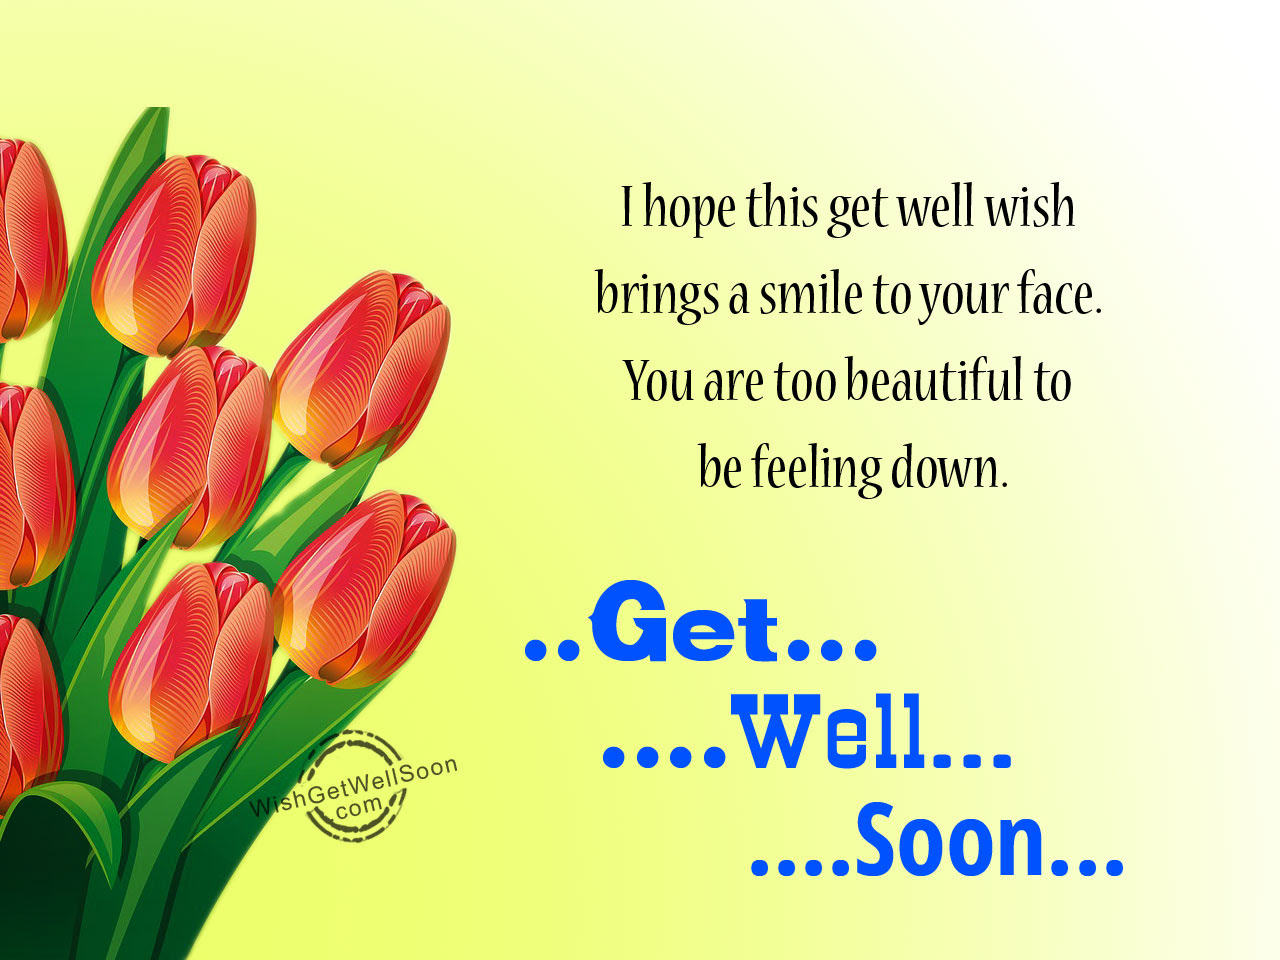 Take time to rest and feel good! I Hope You Will Get Well Soon